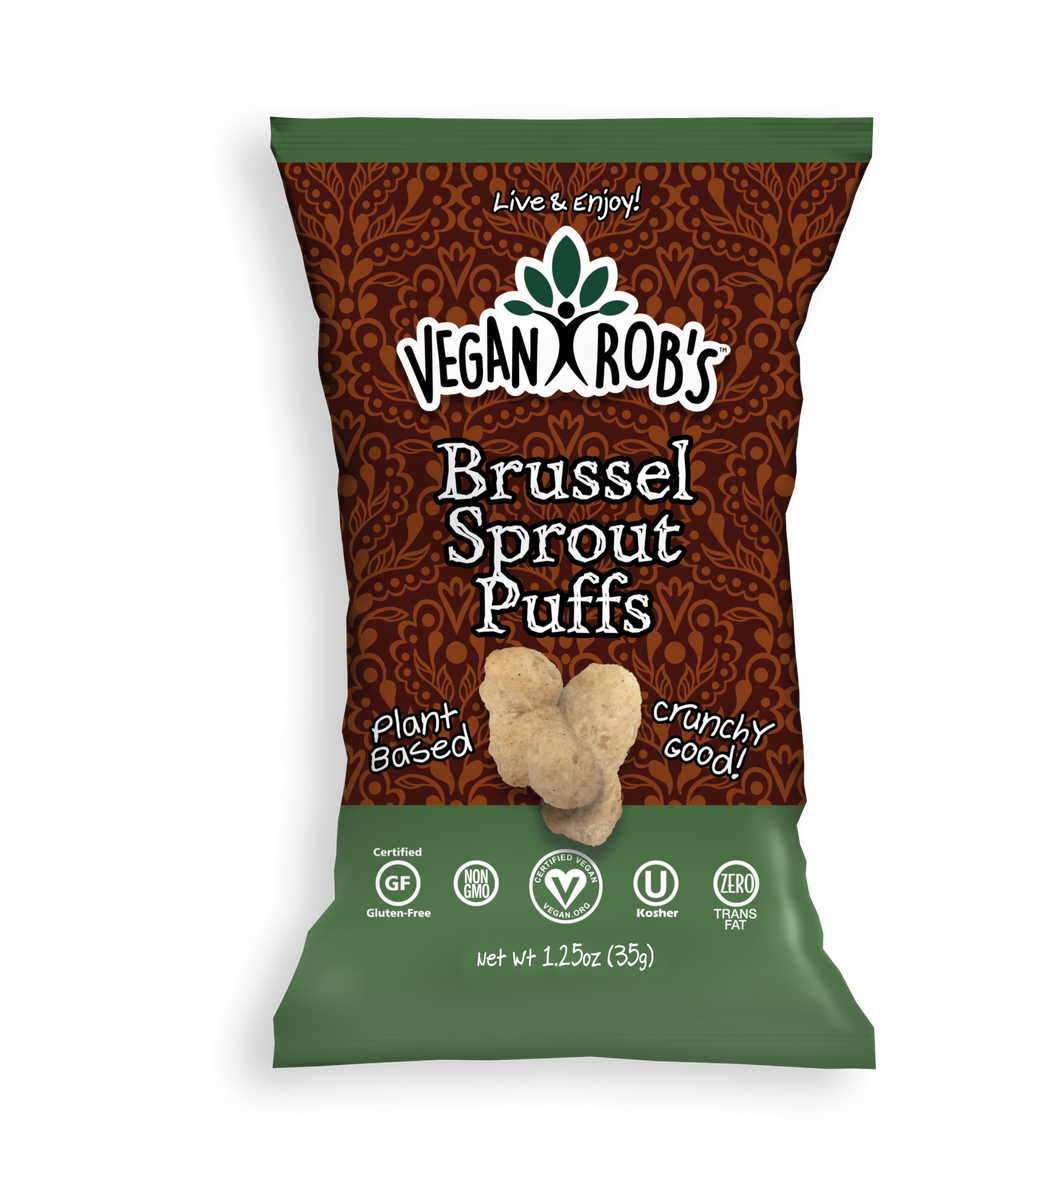 Vegan Rob's - Brussel Sprout Puffs (35g)